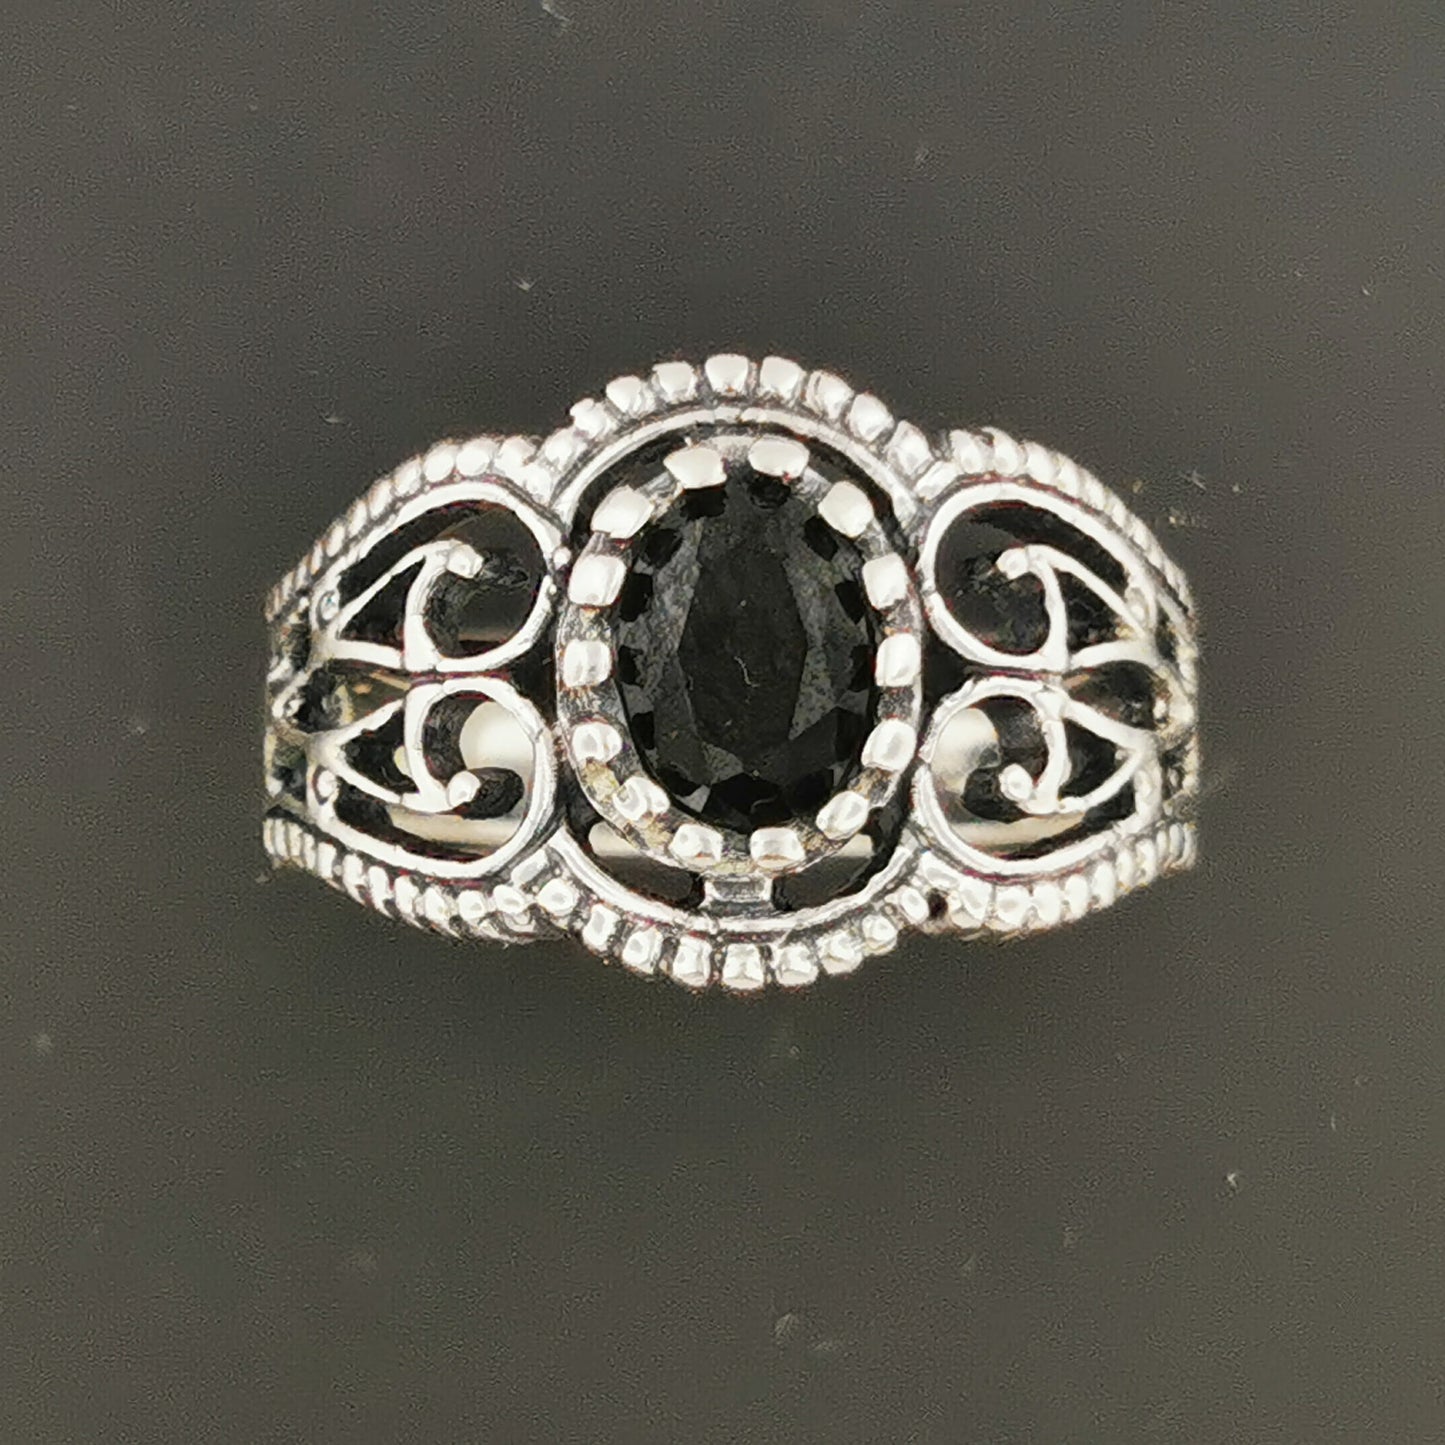 Vintage Style Filigree Birthstone Ring in Sterling Silver, Gothic Style Ring, Victorian Style Ring, 1950 Vintage Style Ring, Birthstone Ring In Sterling Silver, Silver Birthstone Ring, Filigree Birthstone Ring, Vintage Birthstone Ring